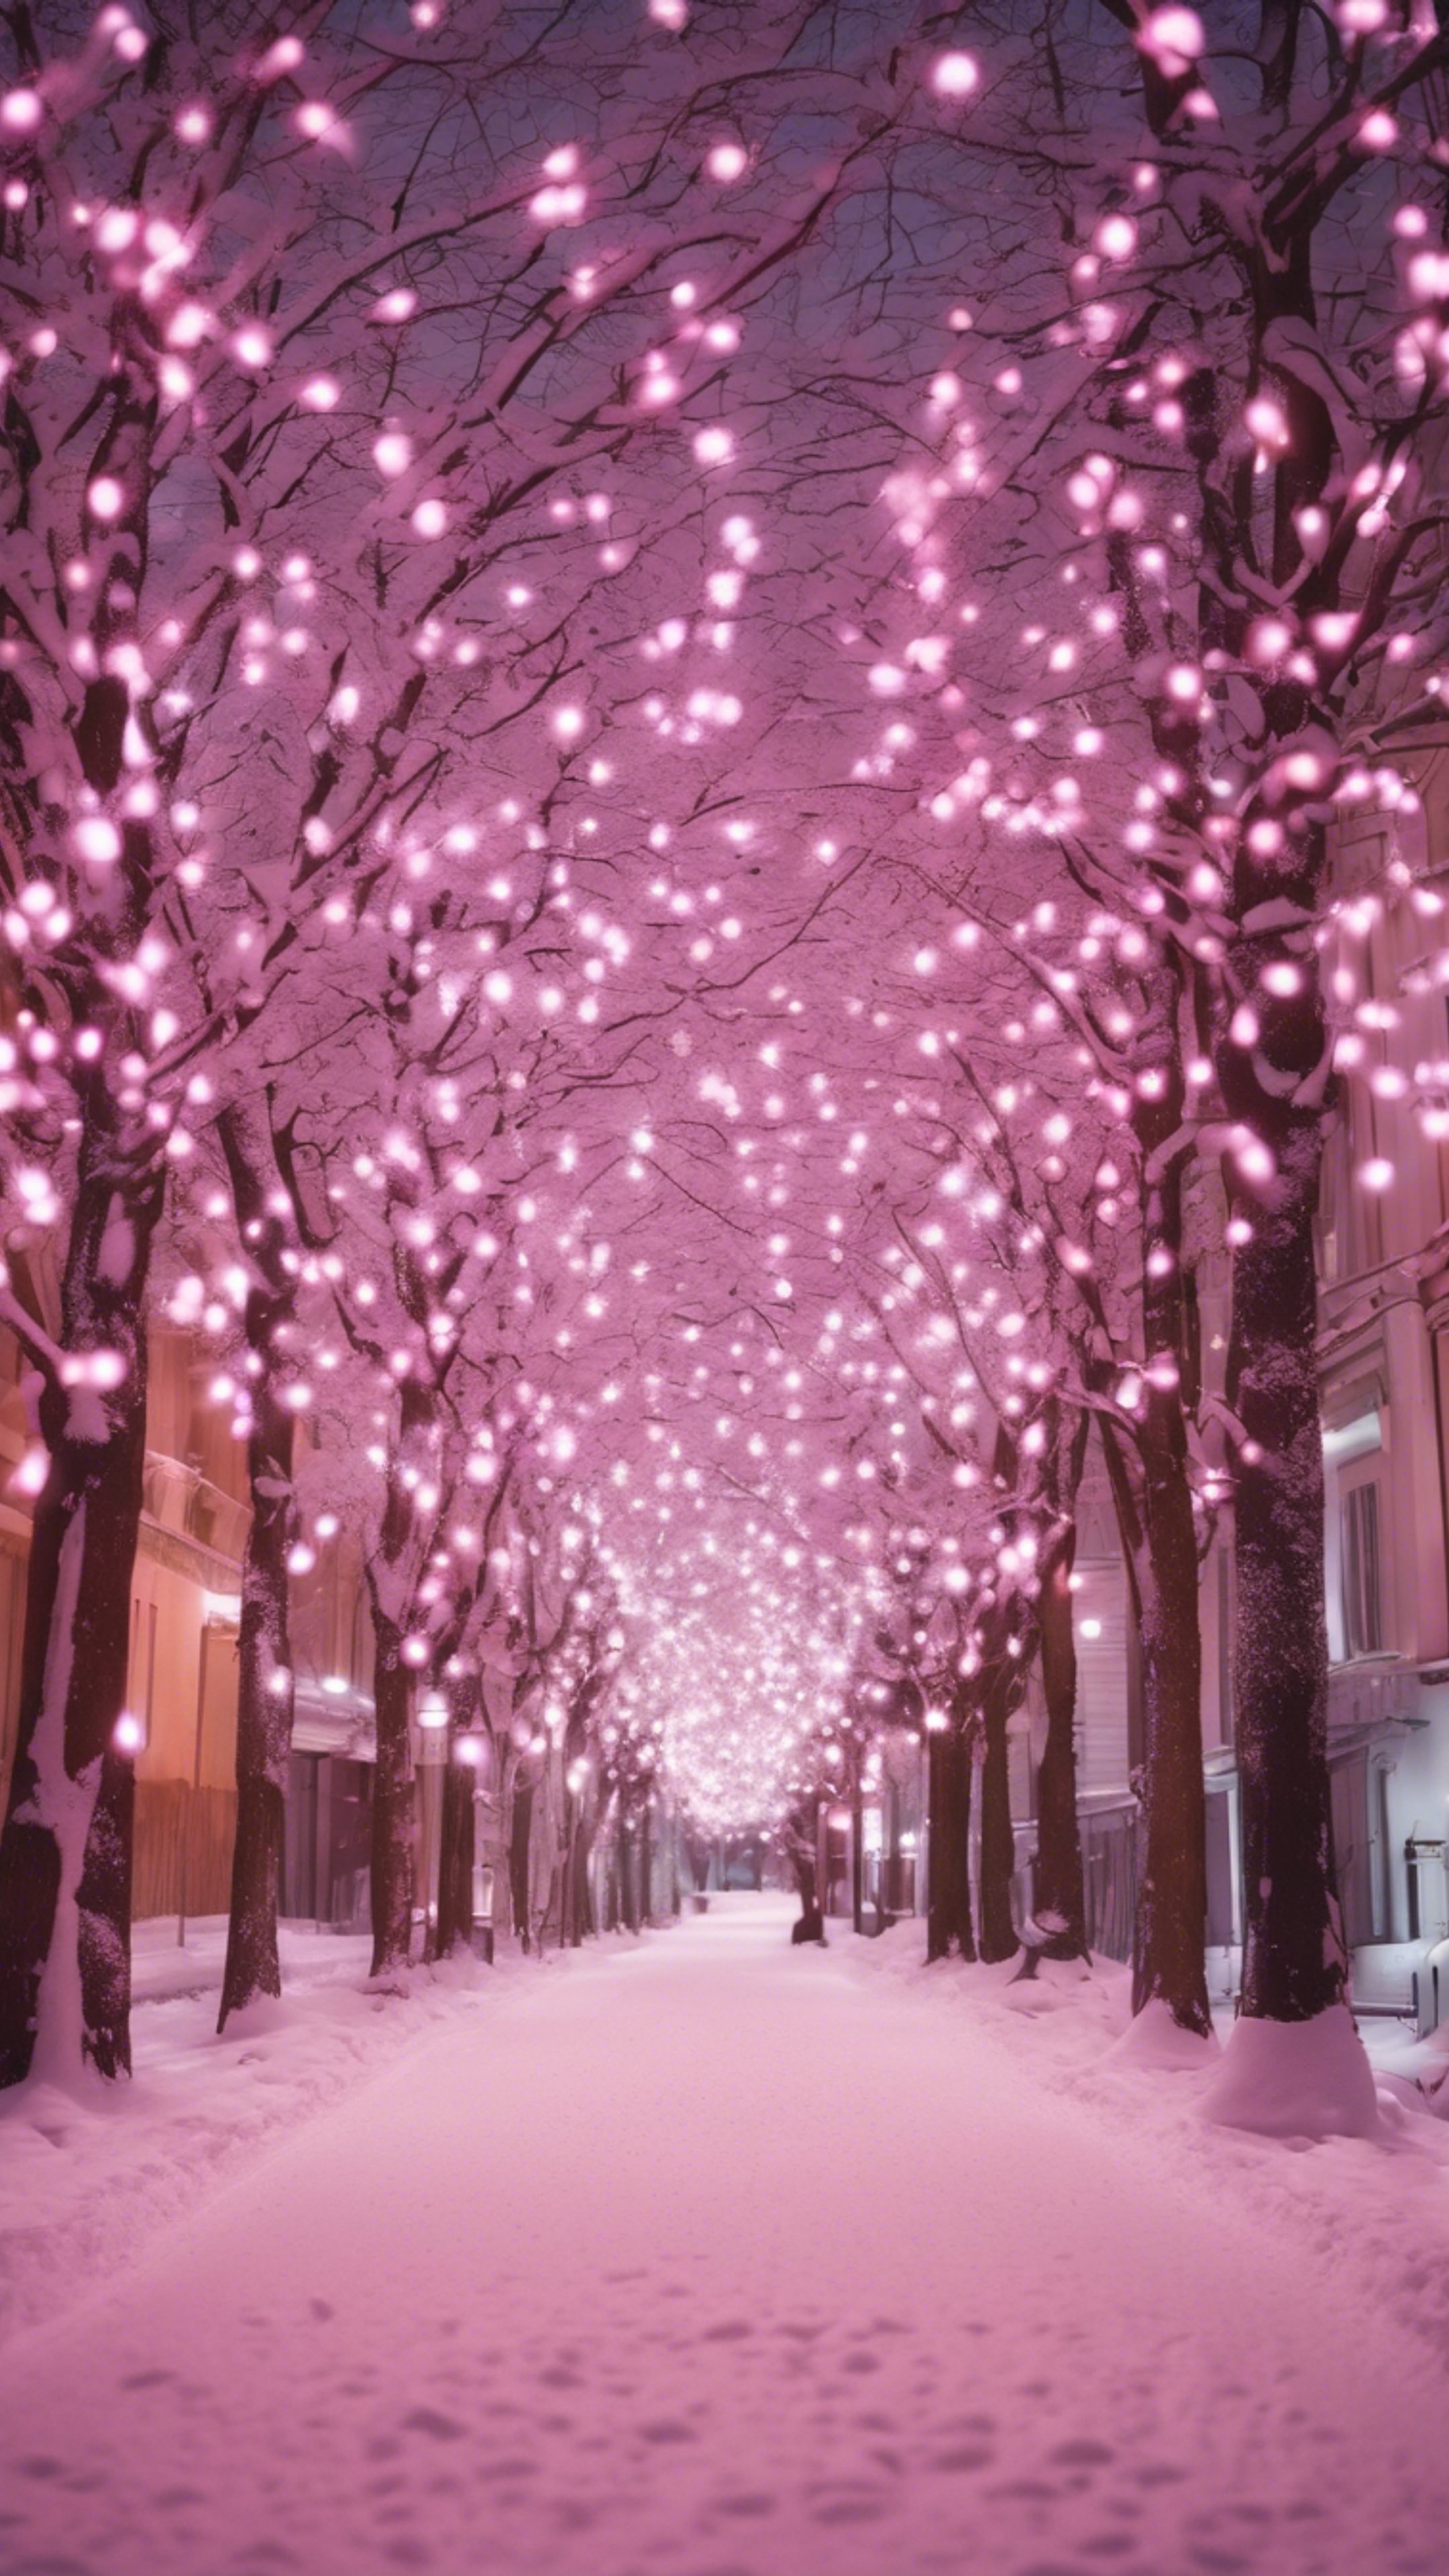 A snow-covered street illuminated by twinkling pink Christmas lights. 벽지[4ec6c372f2074900819e]